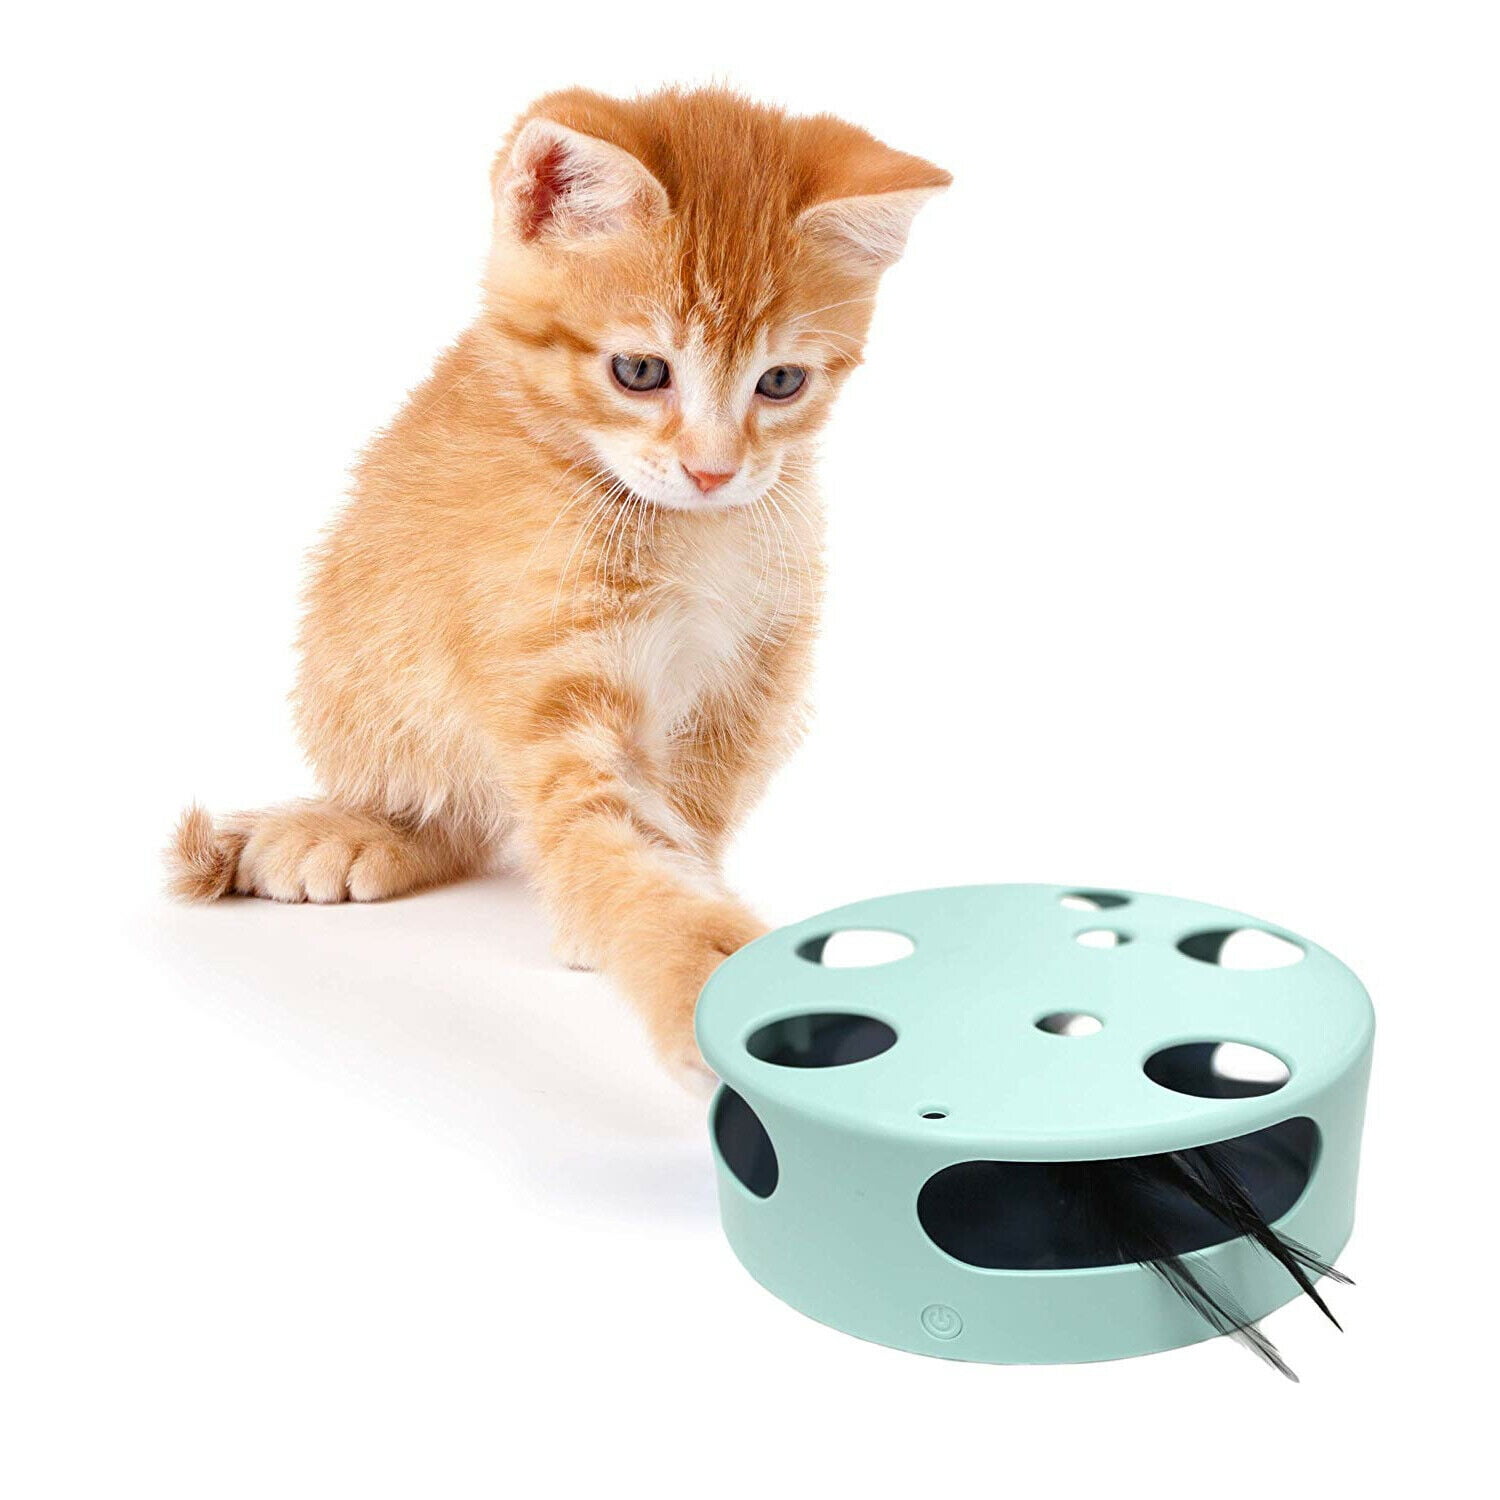 Mouse Robotic Cat Toy Puppy Kitty Kitten Arbitra Interactive Cat Toys Animal Sound Squeaking Cat Toys Interactive Play for Cat 